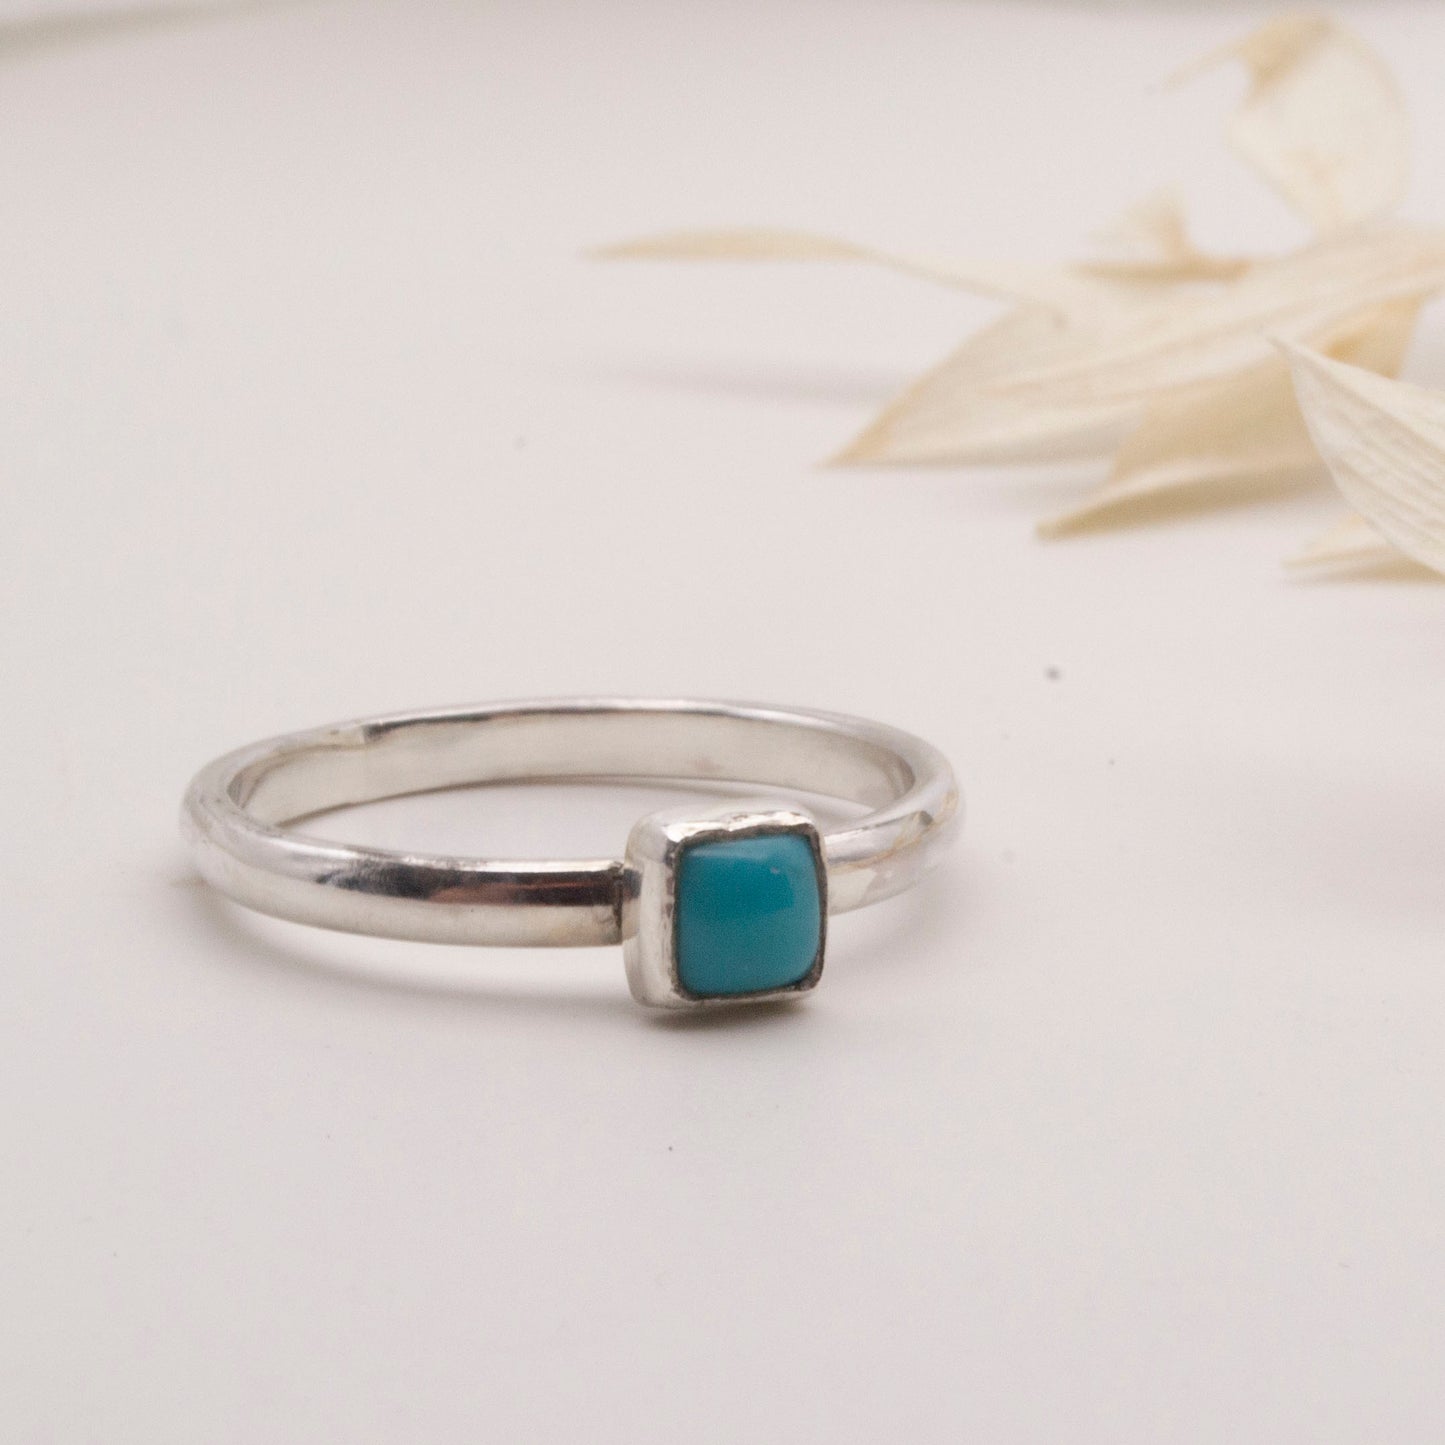 Turquoise square cut ring in size N